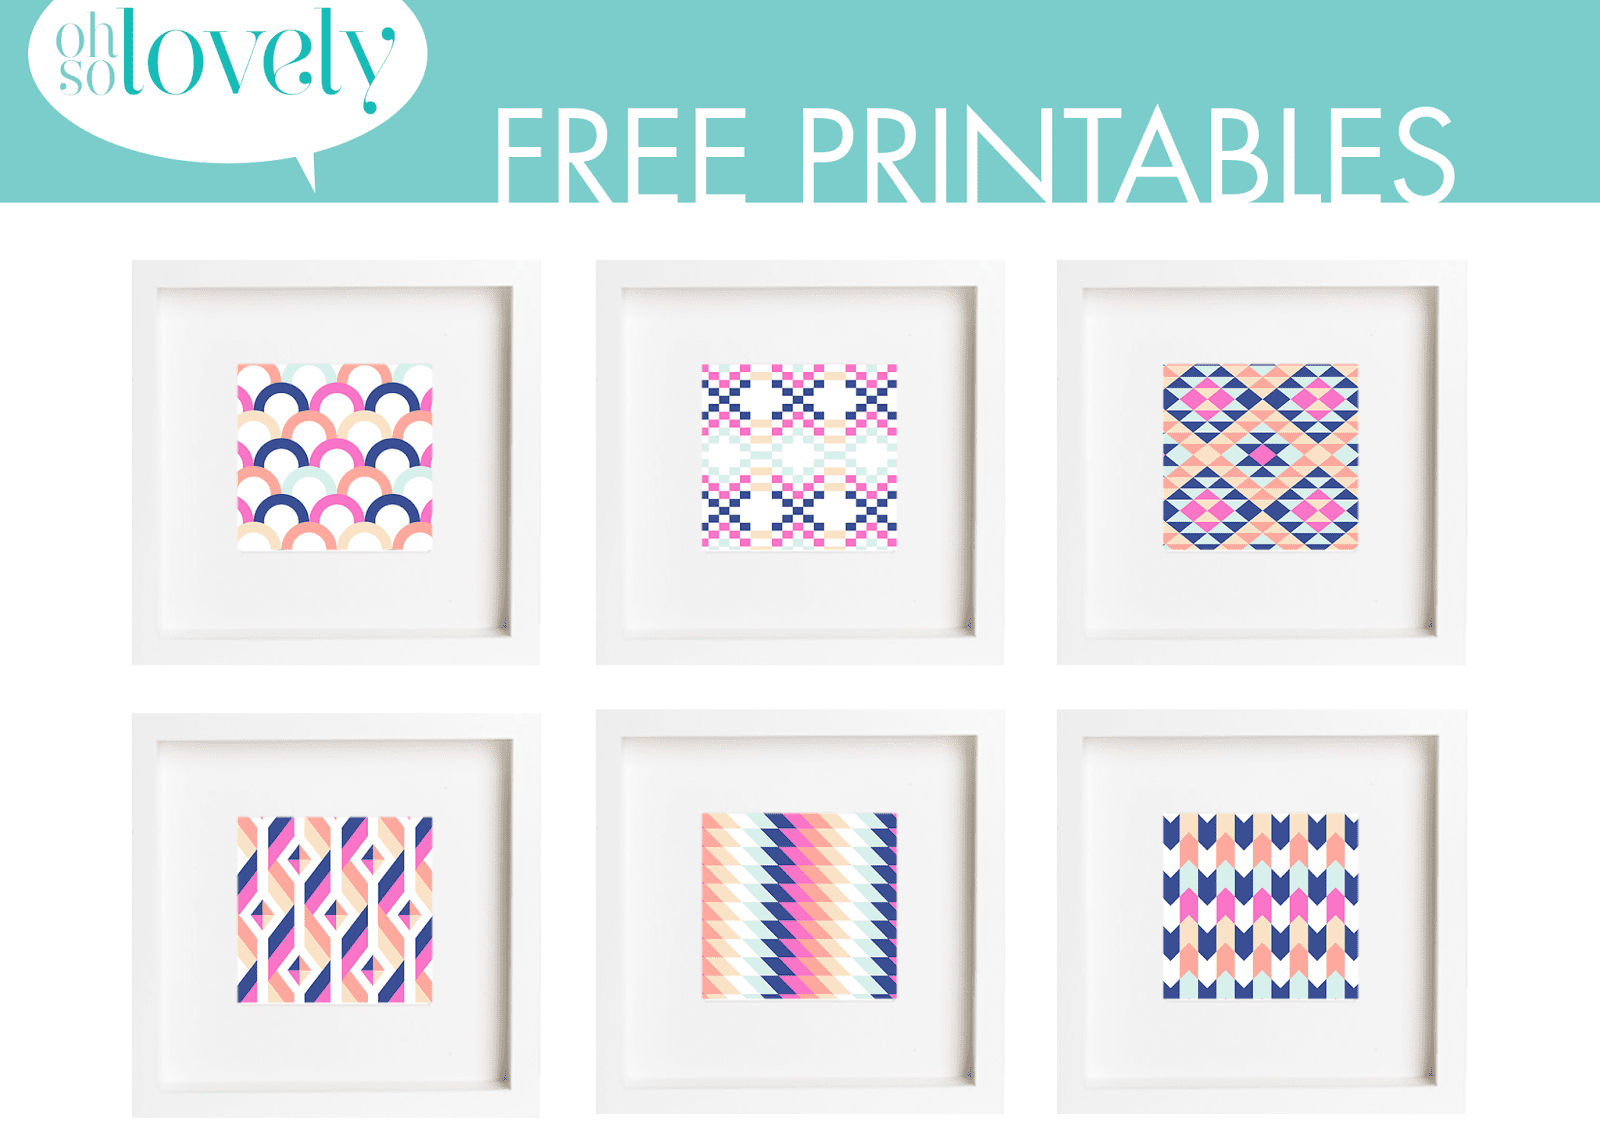 11 Places To Find Free, Printable Wall Art Online - Free Printable Wall Decor